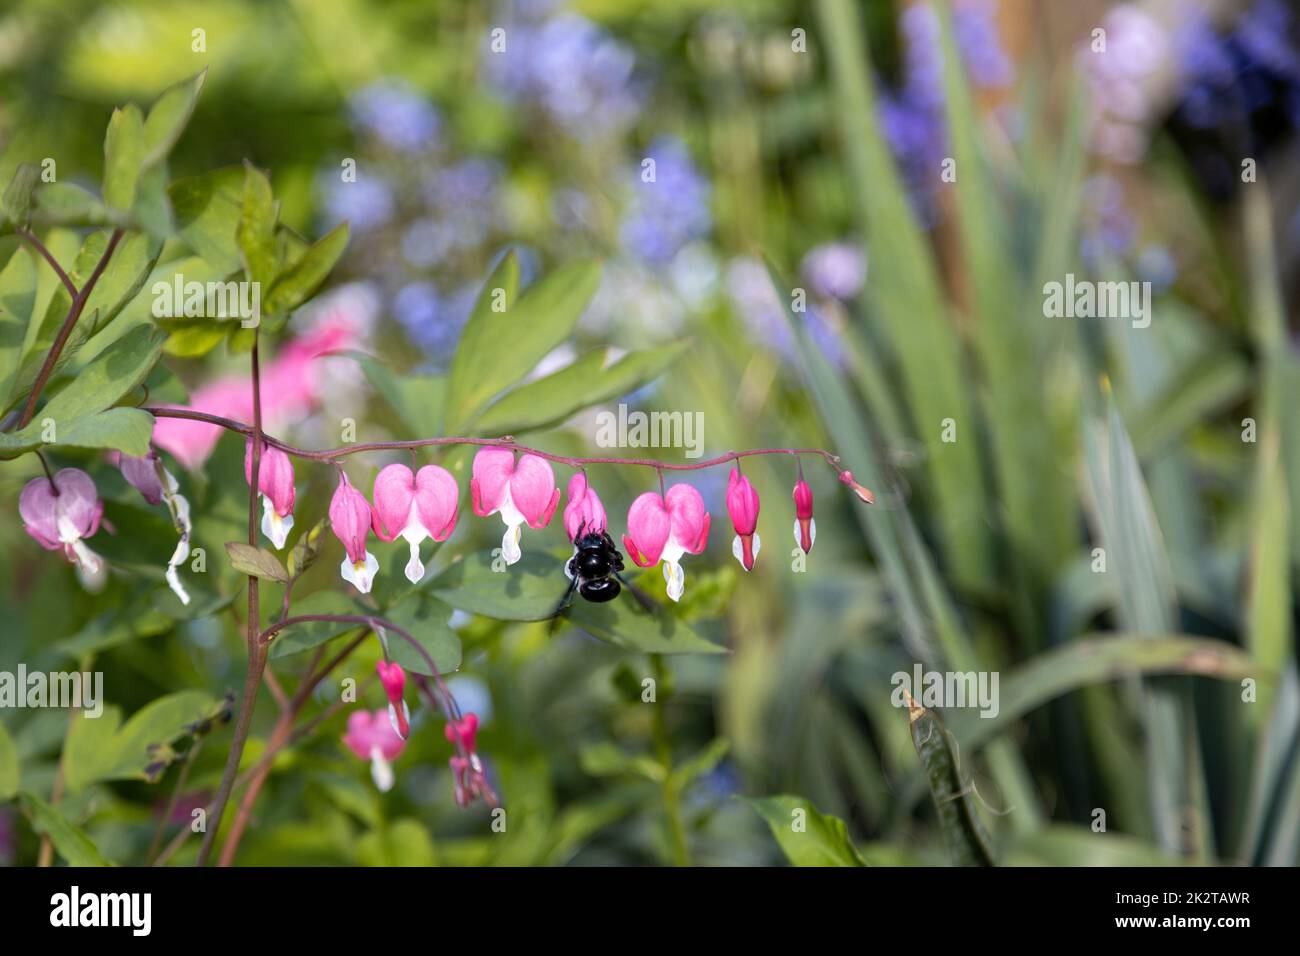 A blue wood bee searches for pollen on a heart flower,Lamprocapnos spectabilis. Stock Photo